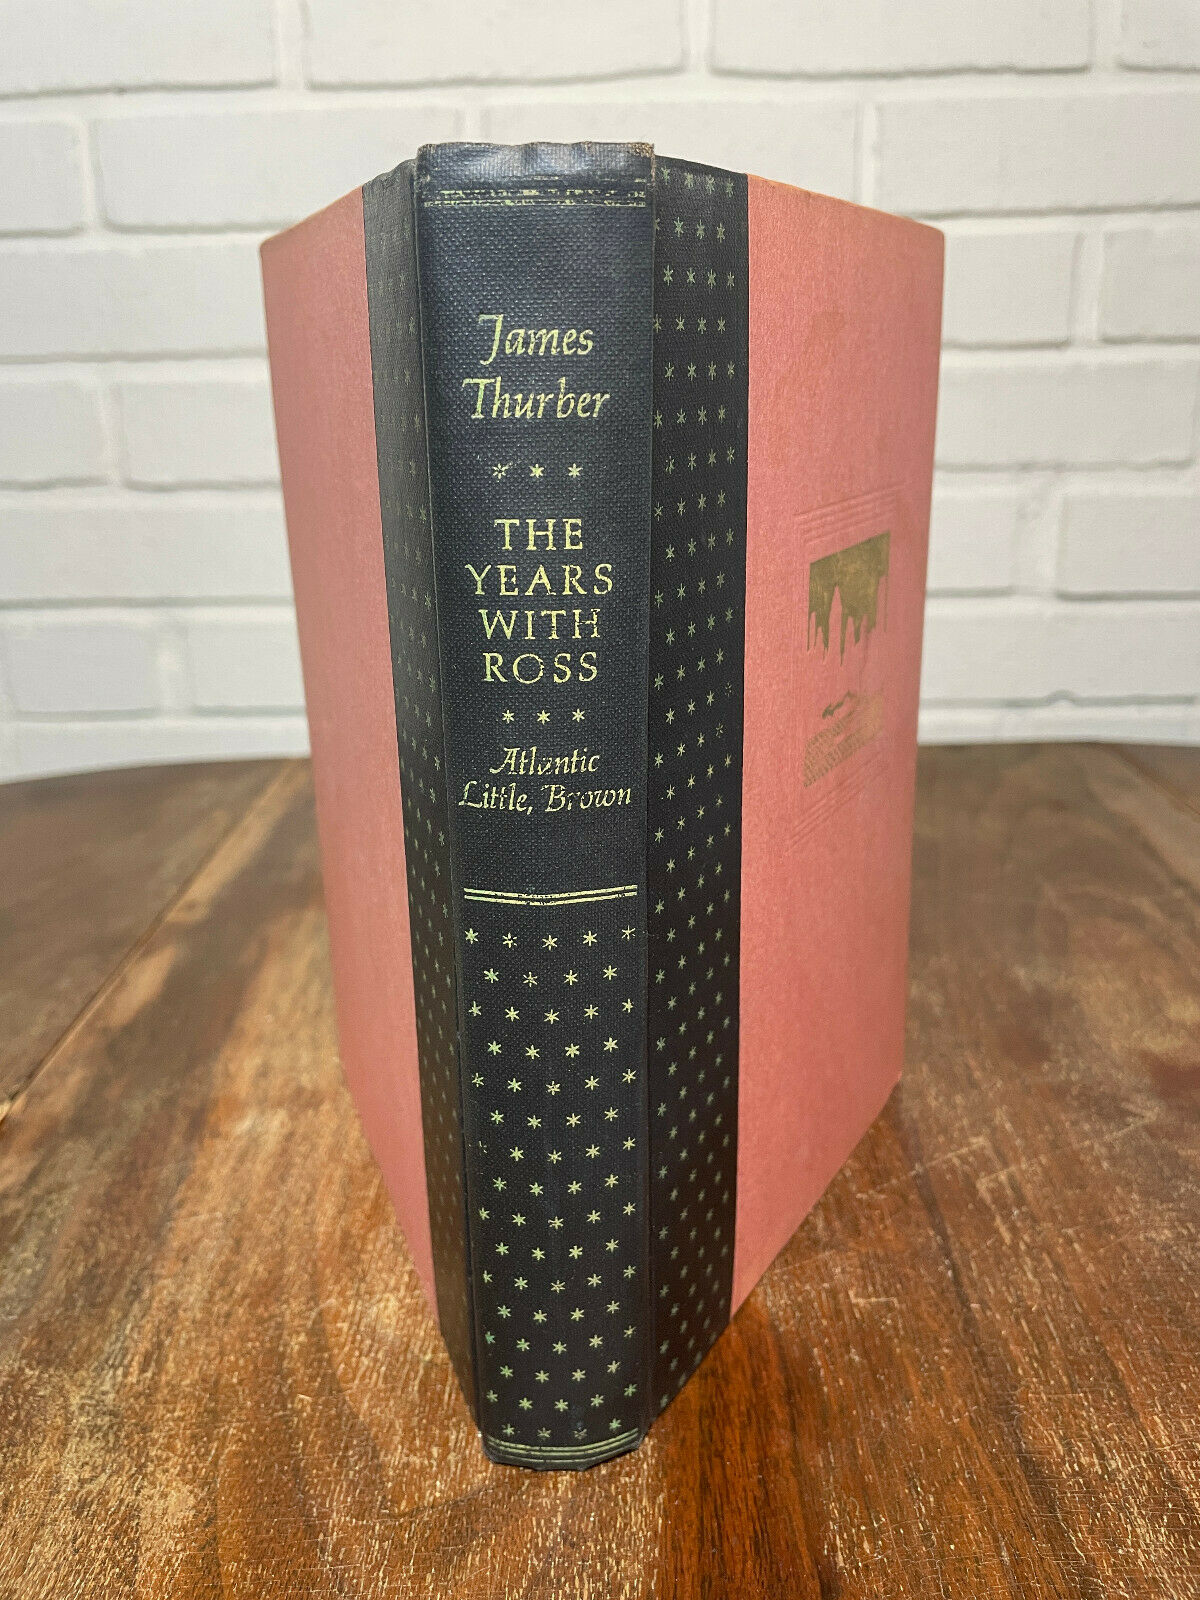 The Years With Ross by James Thurber [1959]